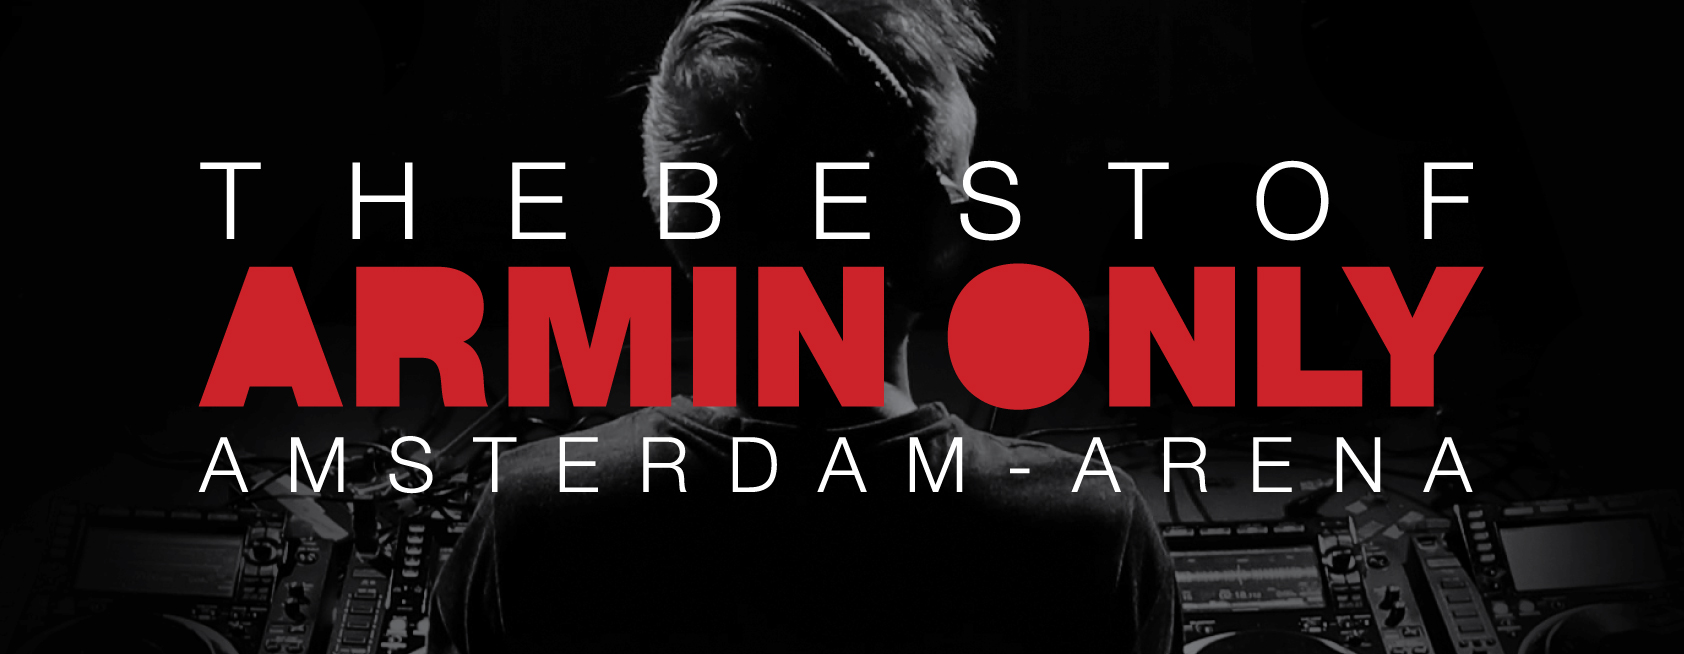 the best of armin only